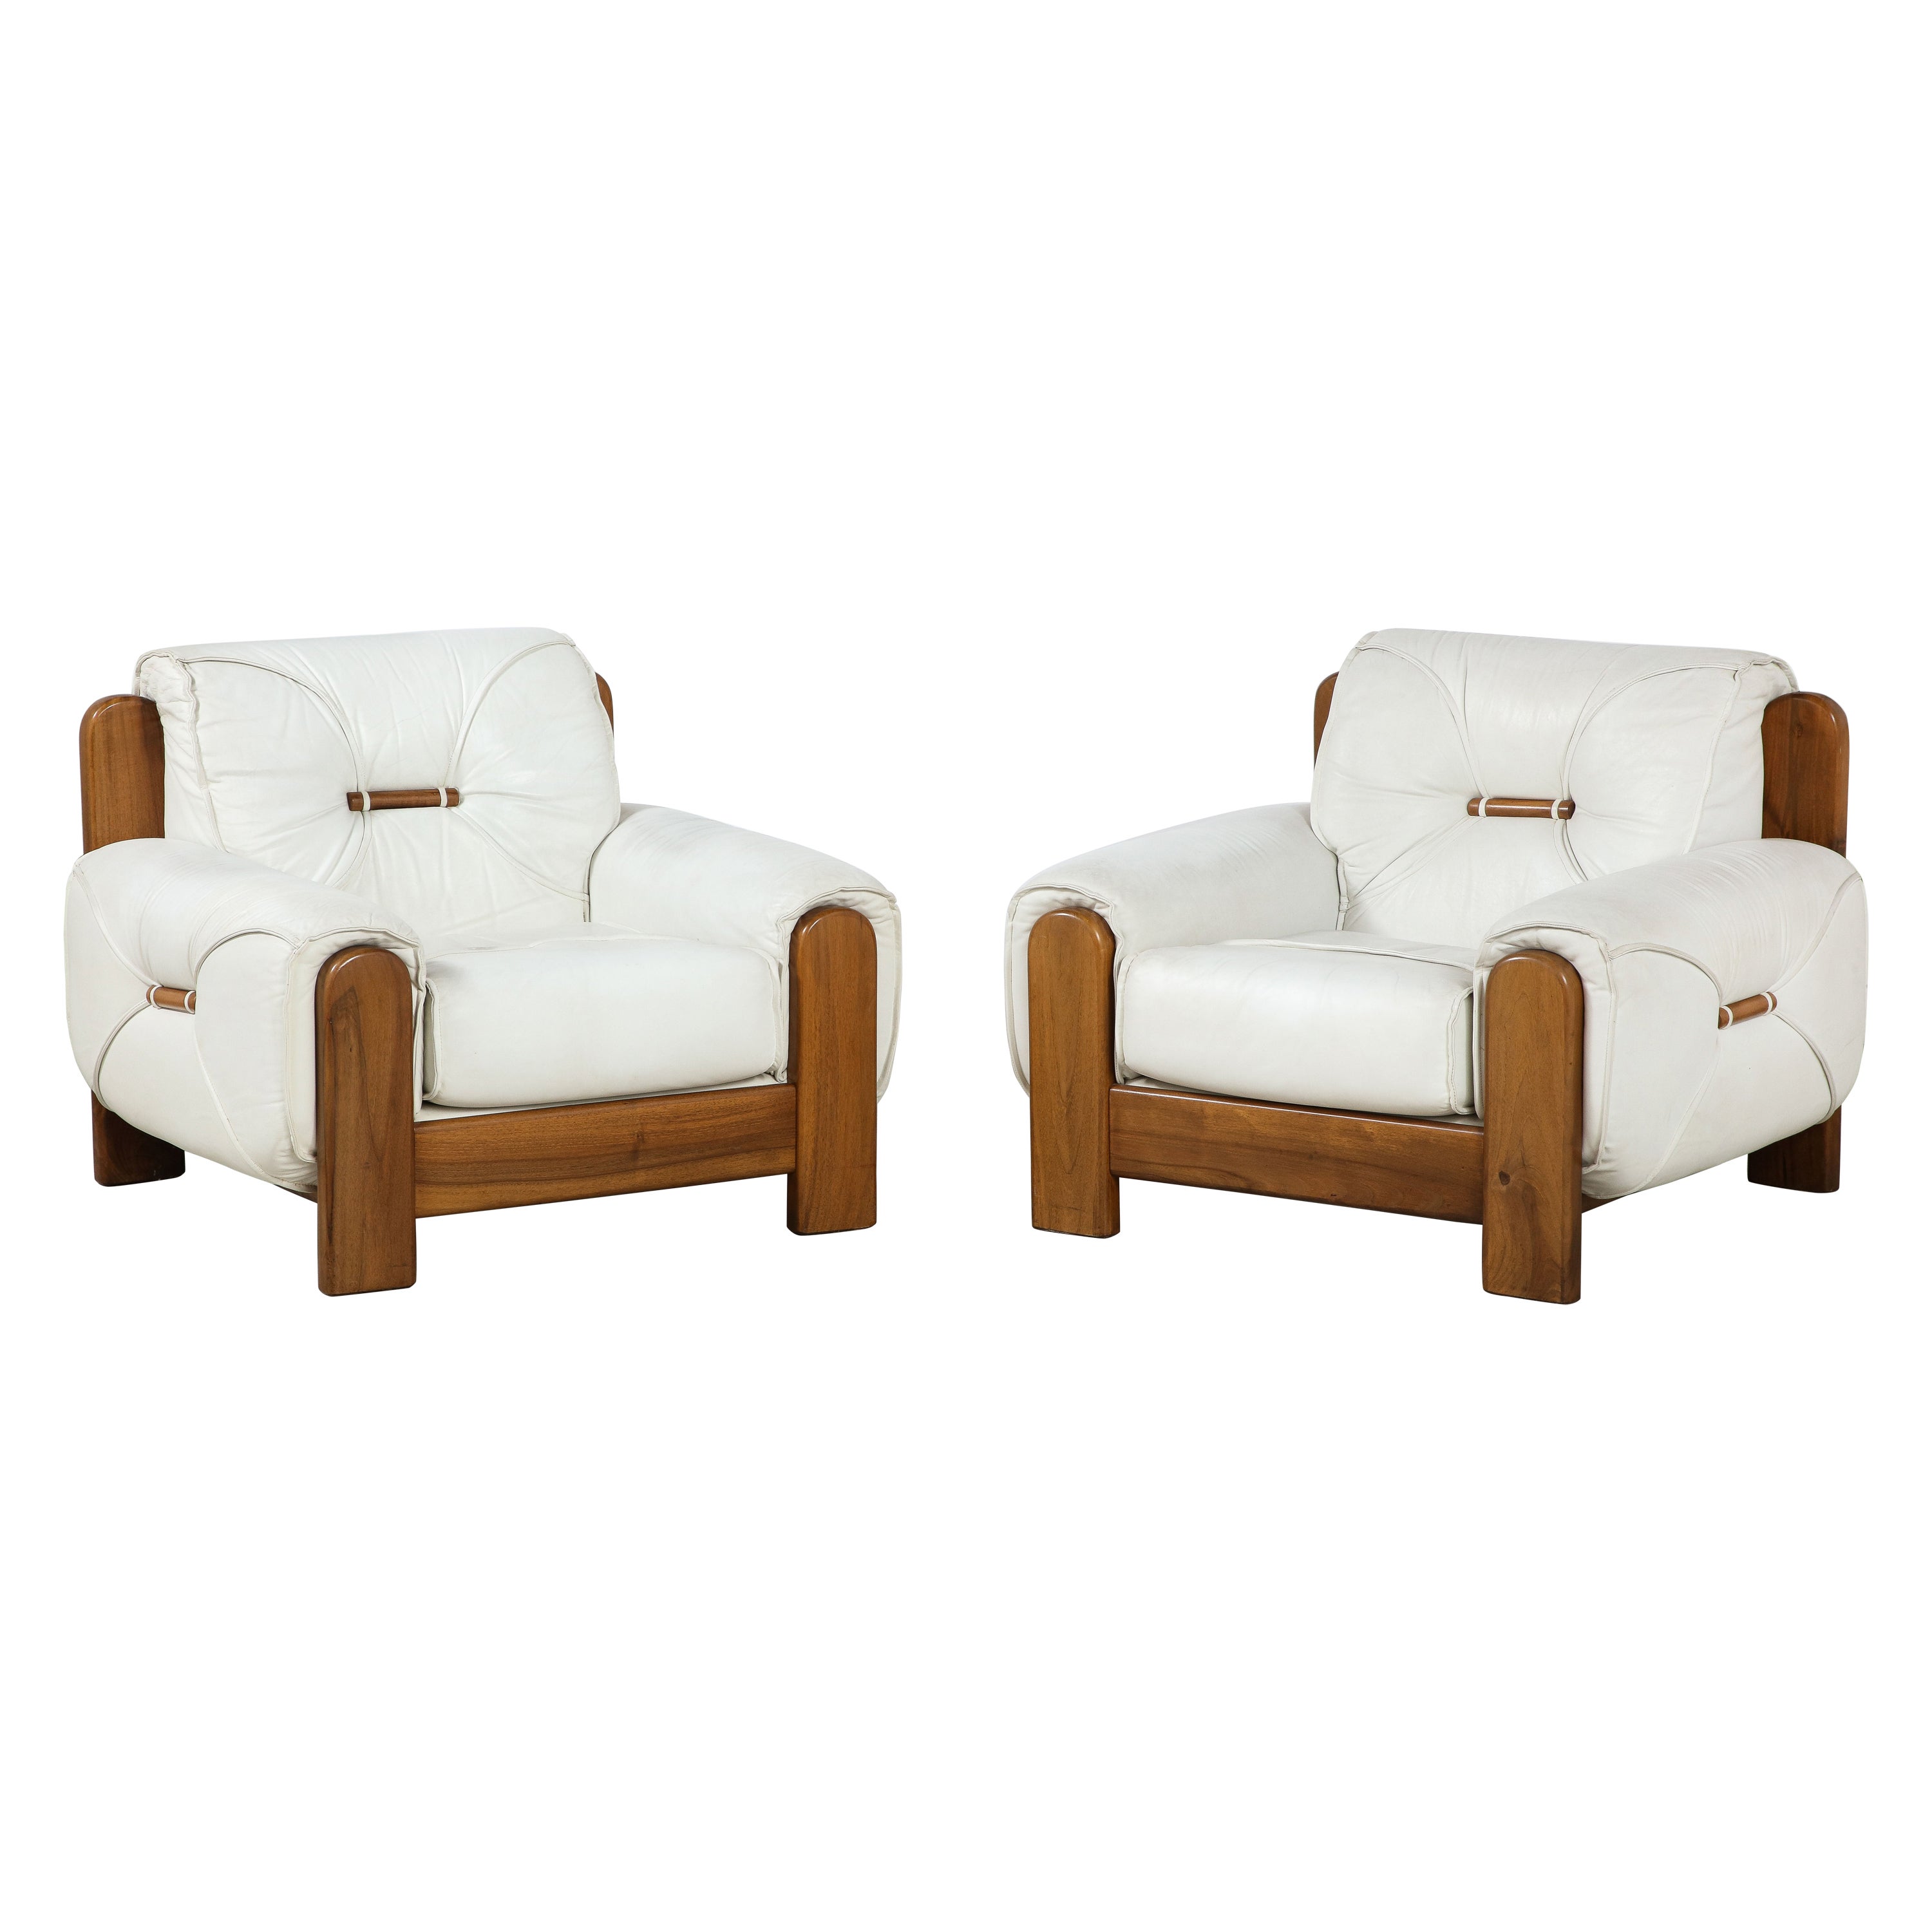 Pair of Italian 1970's Walnut and White Leather Lounge Chairs For Sale